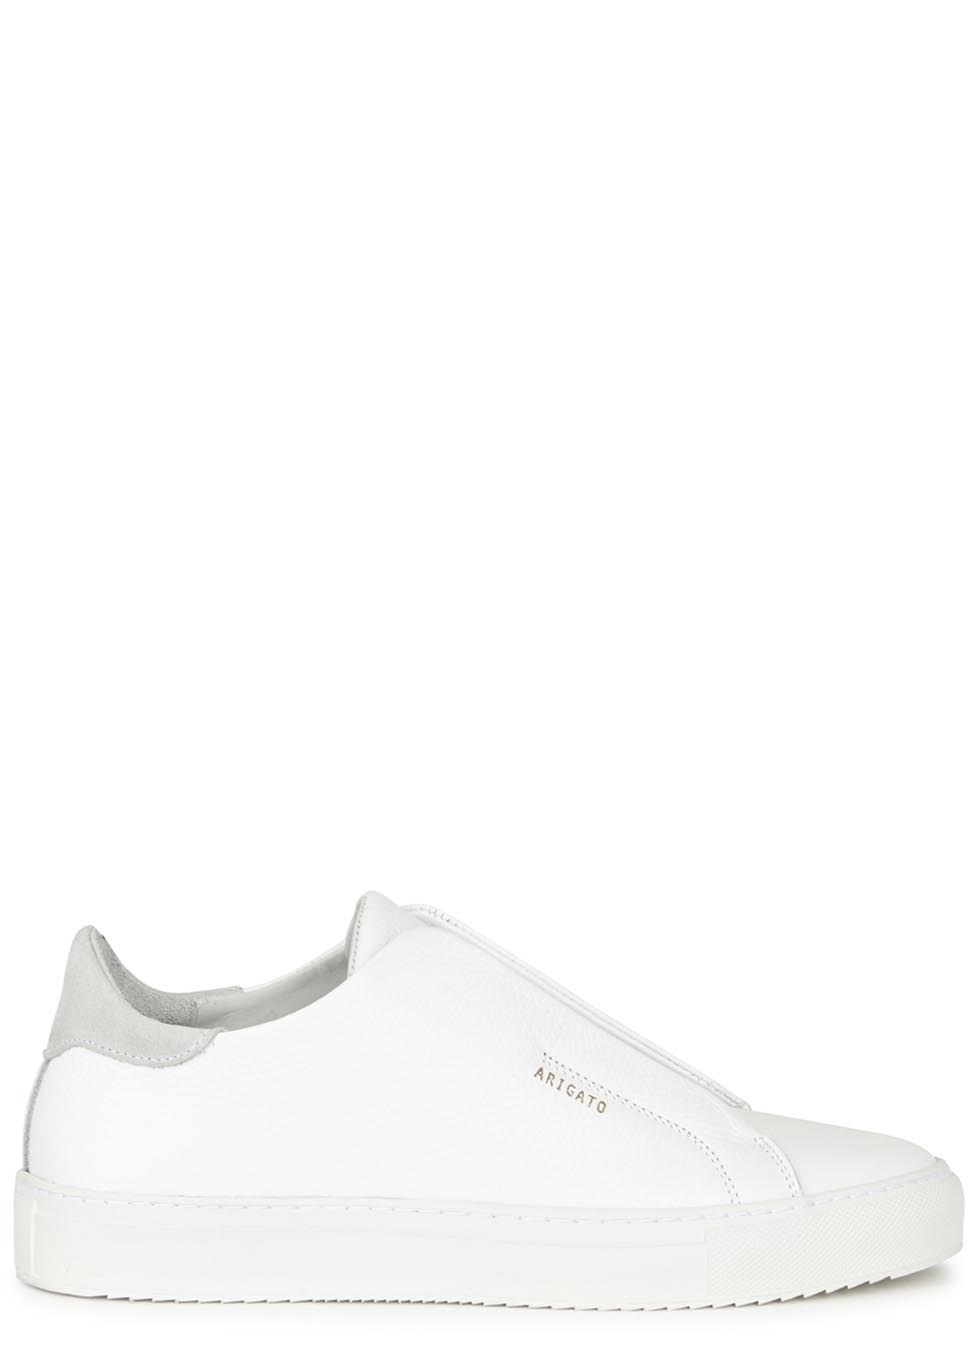 Clean 90 white laceless leather trainers